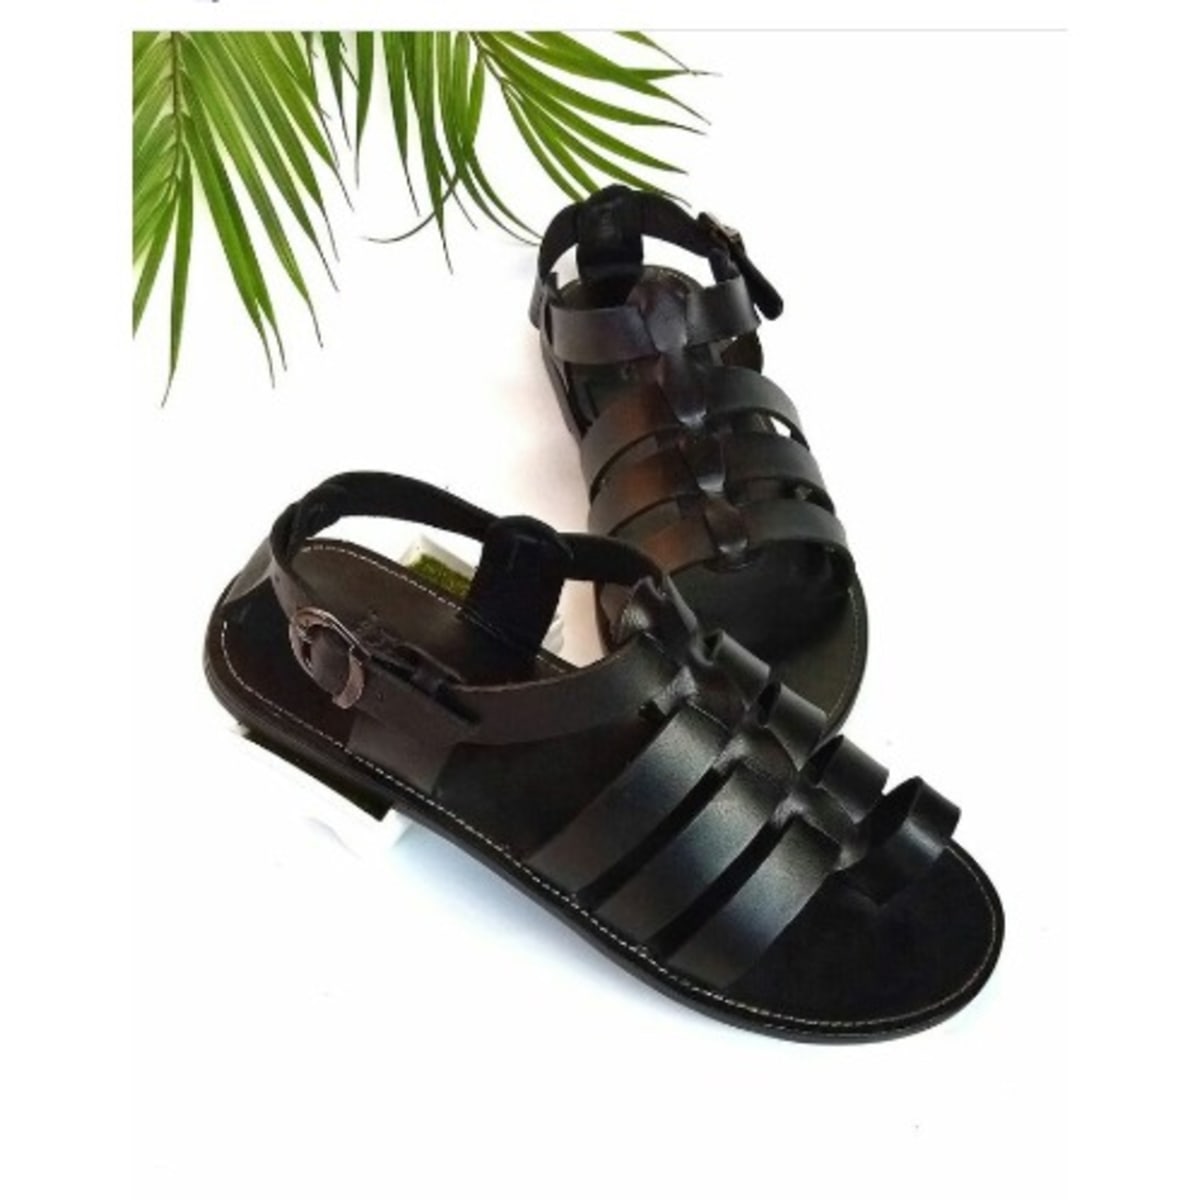 Warrior Princess Gladiator Sandals Are The MustHave Shoes For Spring 2015